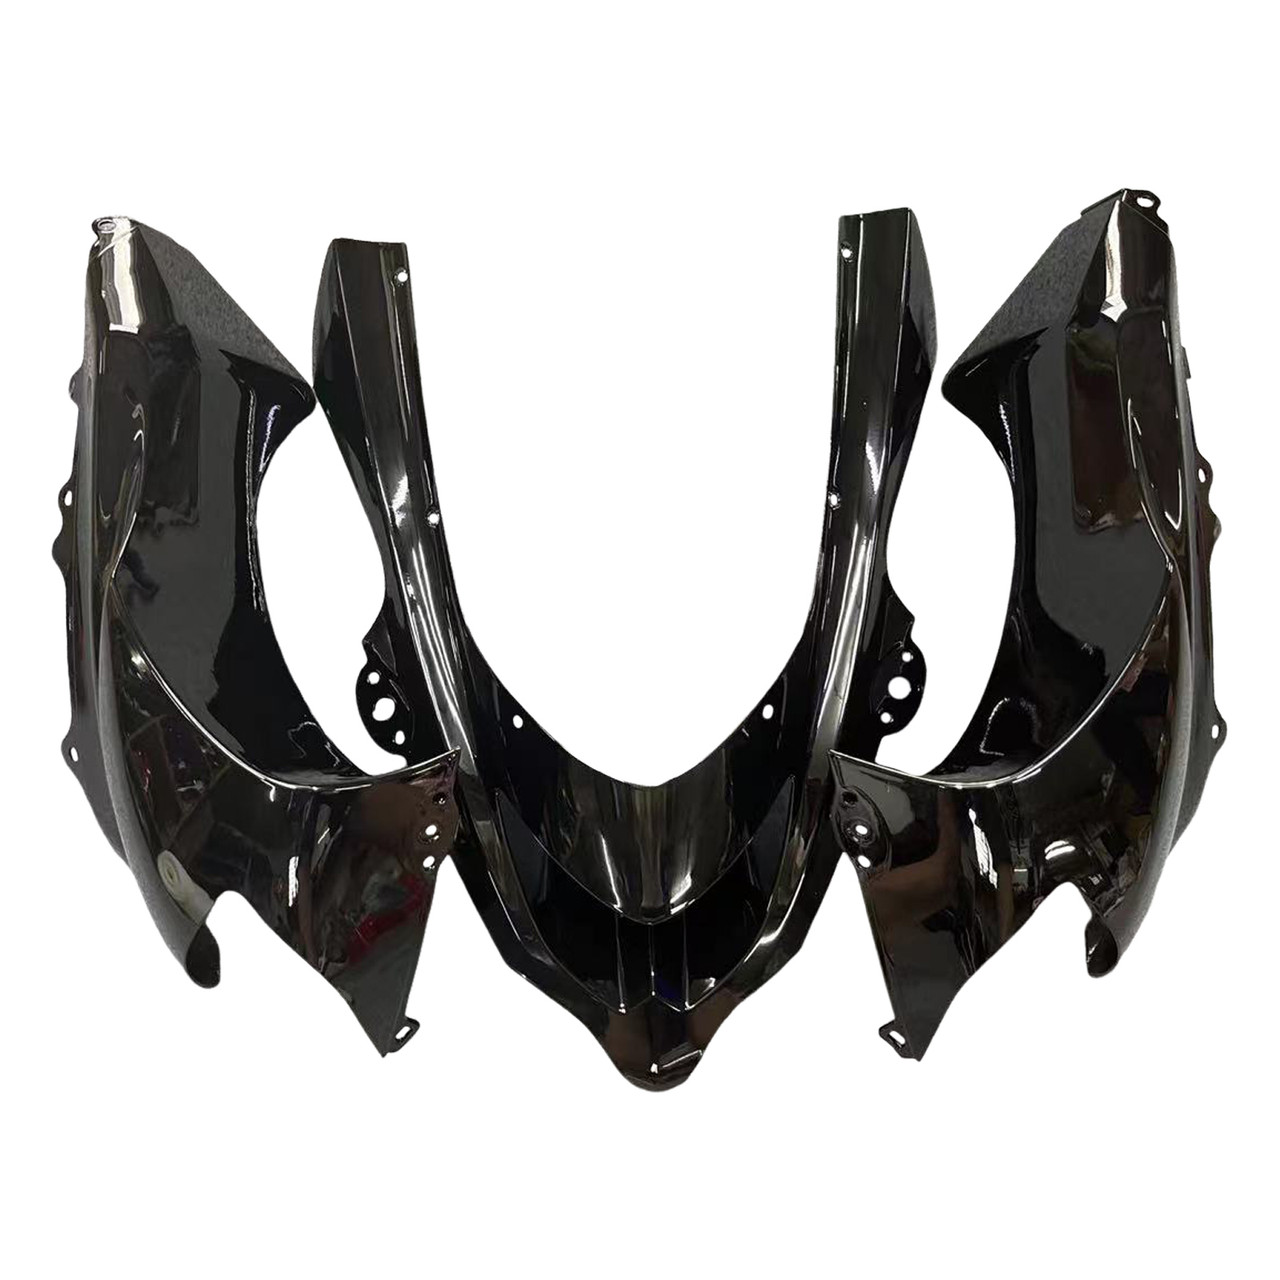 Amotopart Fairing Injection Plastic Kit Glossy Black Fit For Kawasaki Zx10R 04-05